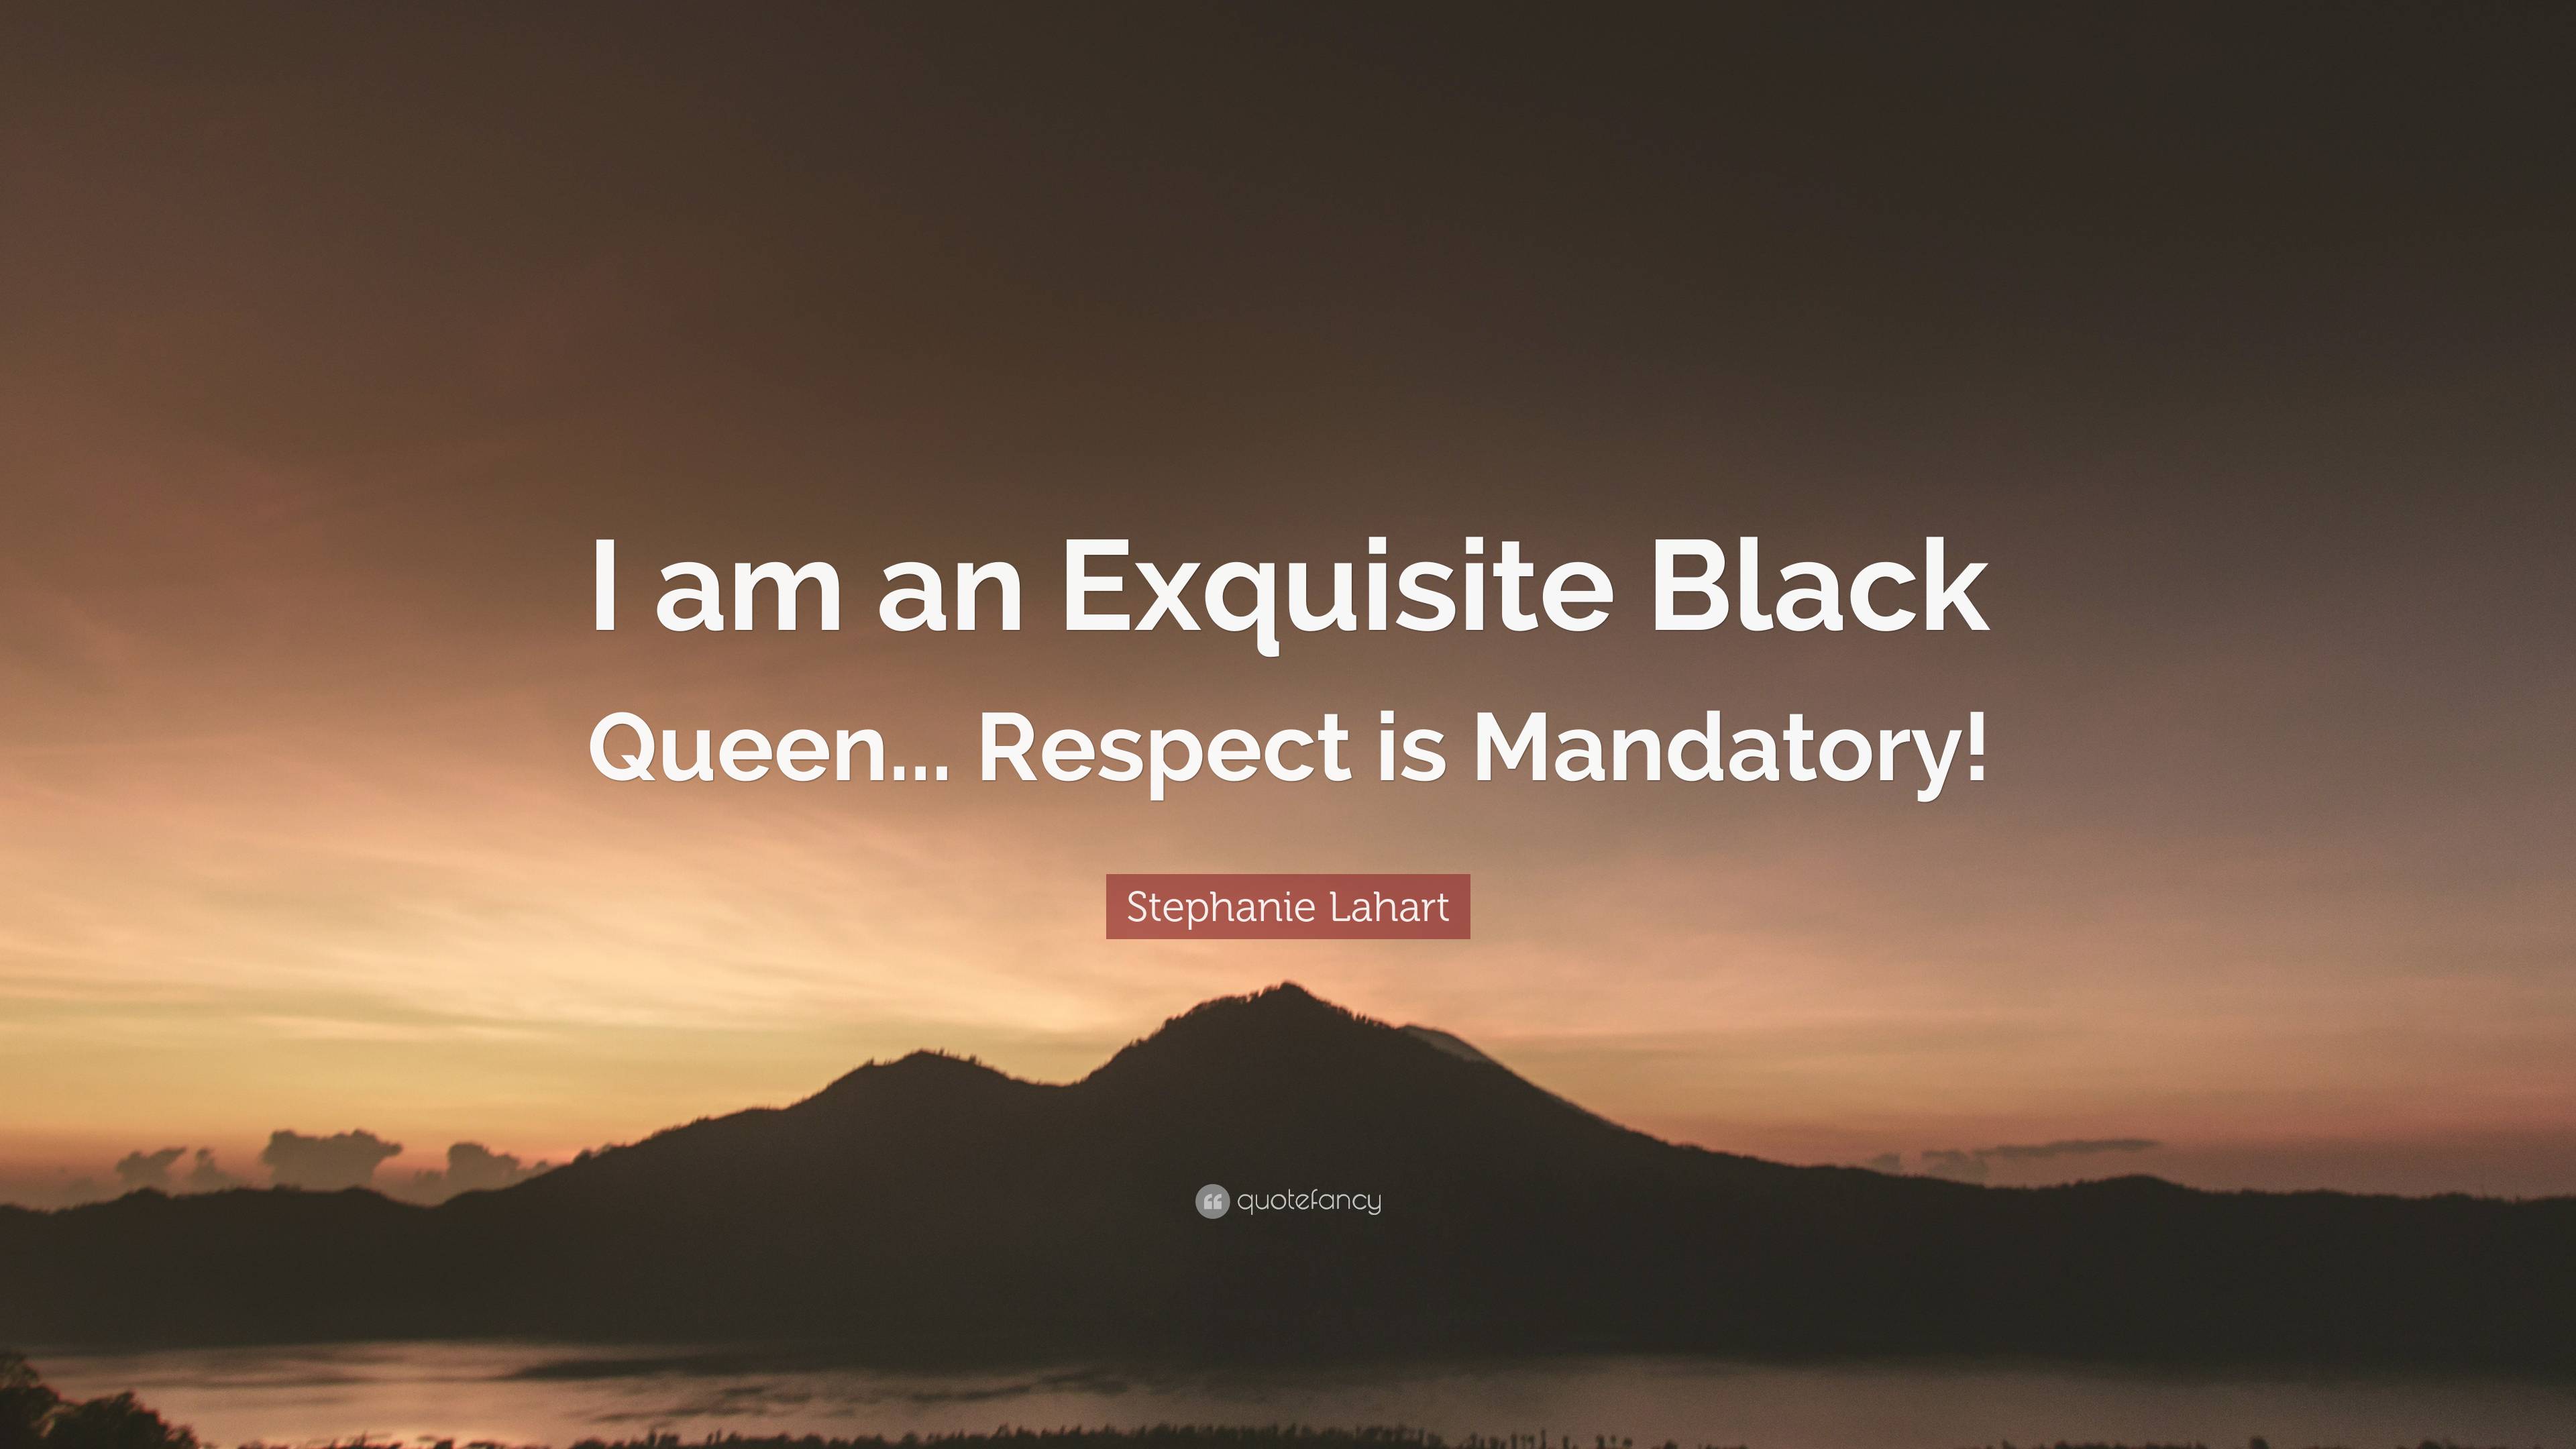 I am an exquisite black queen.. respect is Mandatory”